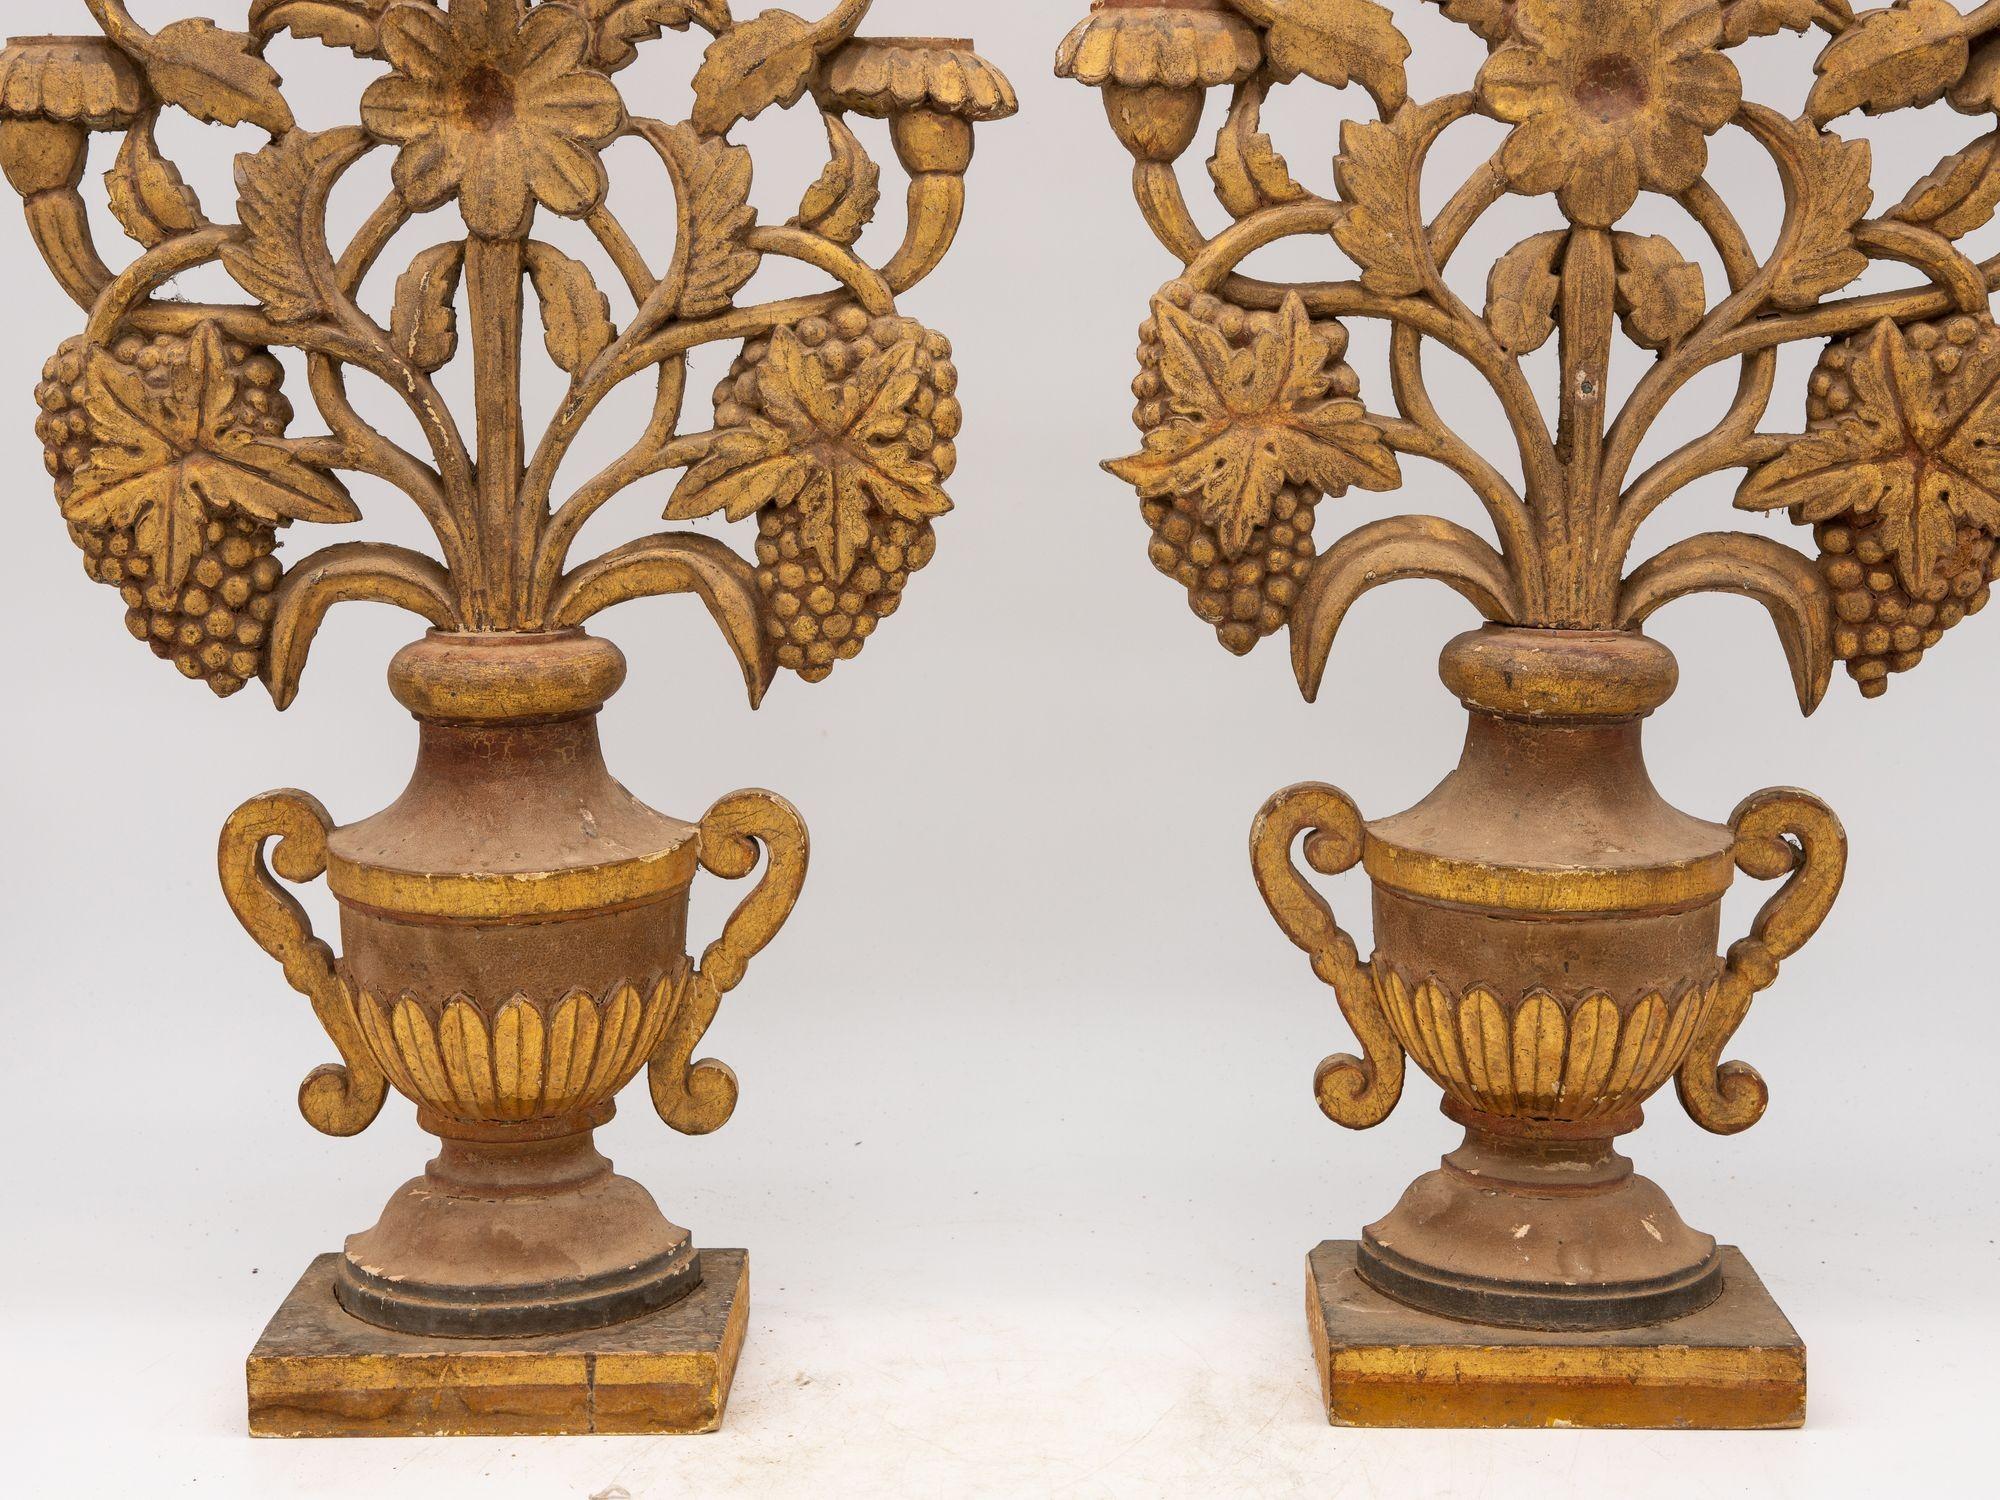 

Exquisite and unusul, this pair of antique carved wooden urns from late 19th century France captivates with its timeless elegance. Standing as delicate mantle ornaments, each urn showcases meticulous craftsmanship, portraying intricate floral